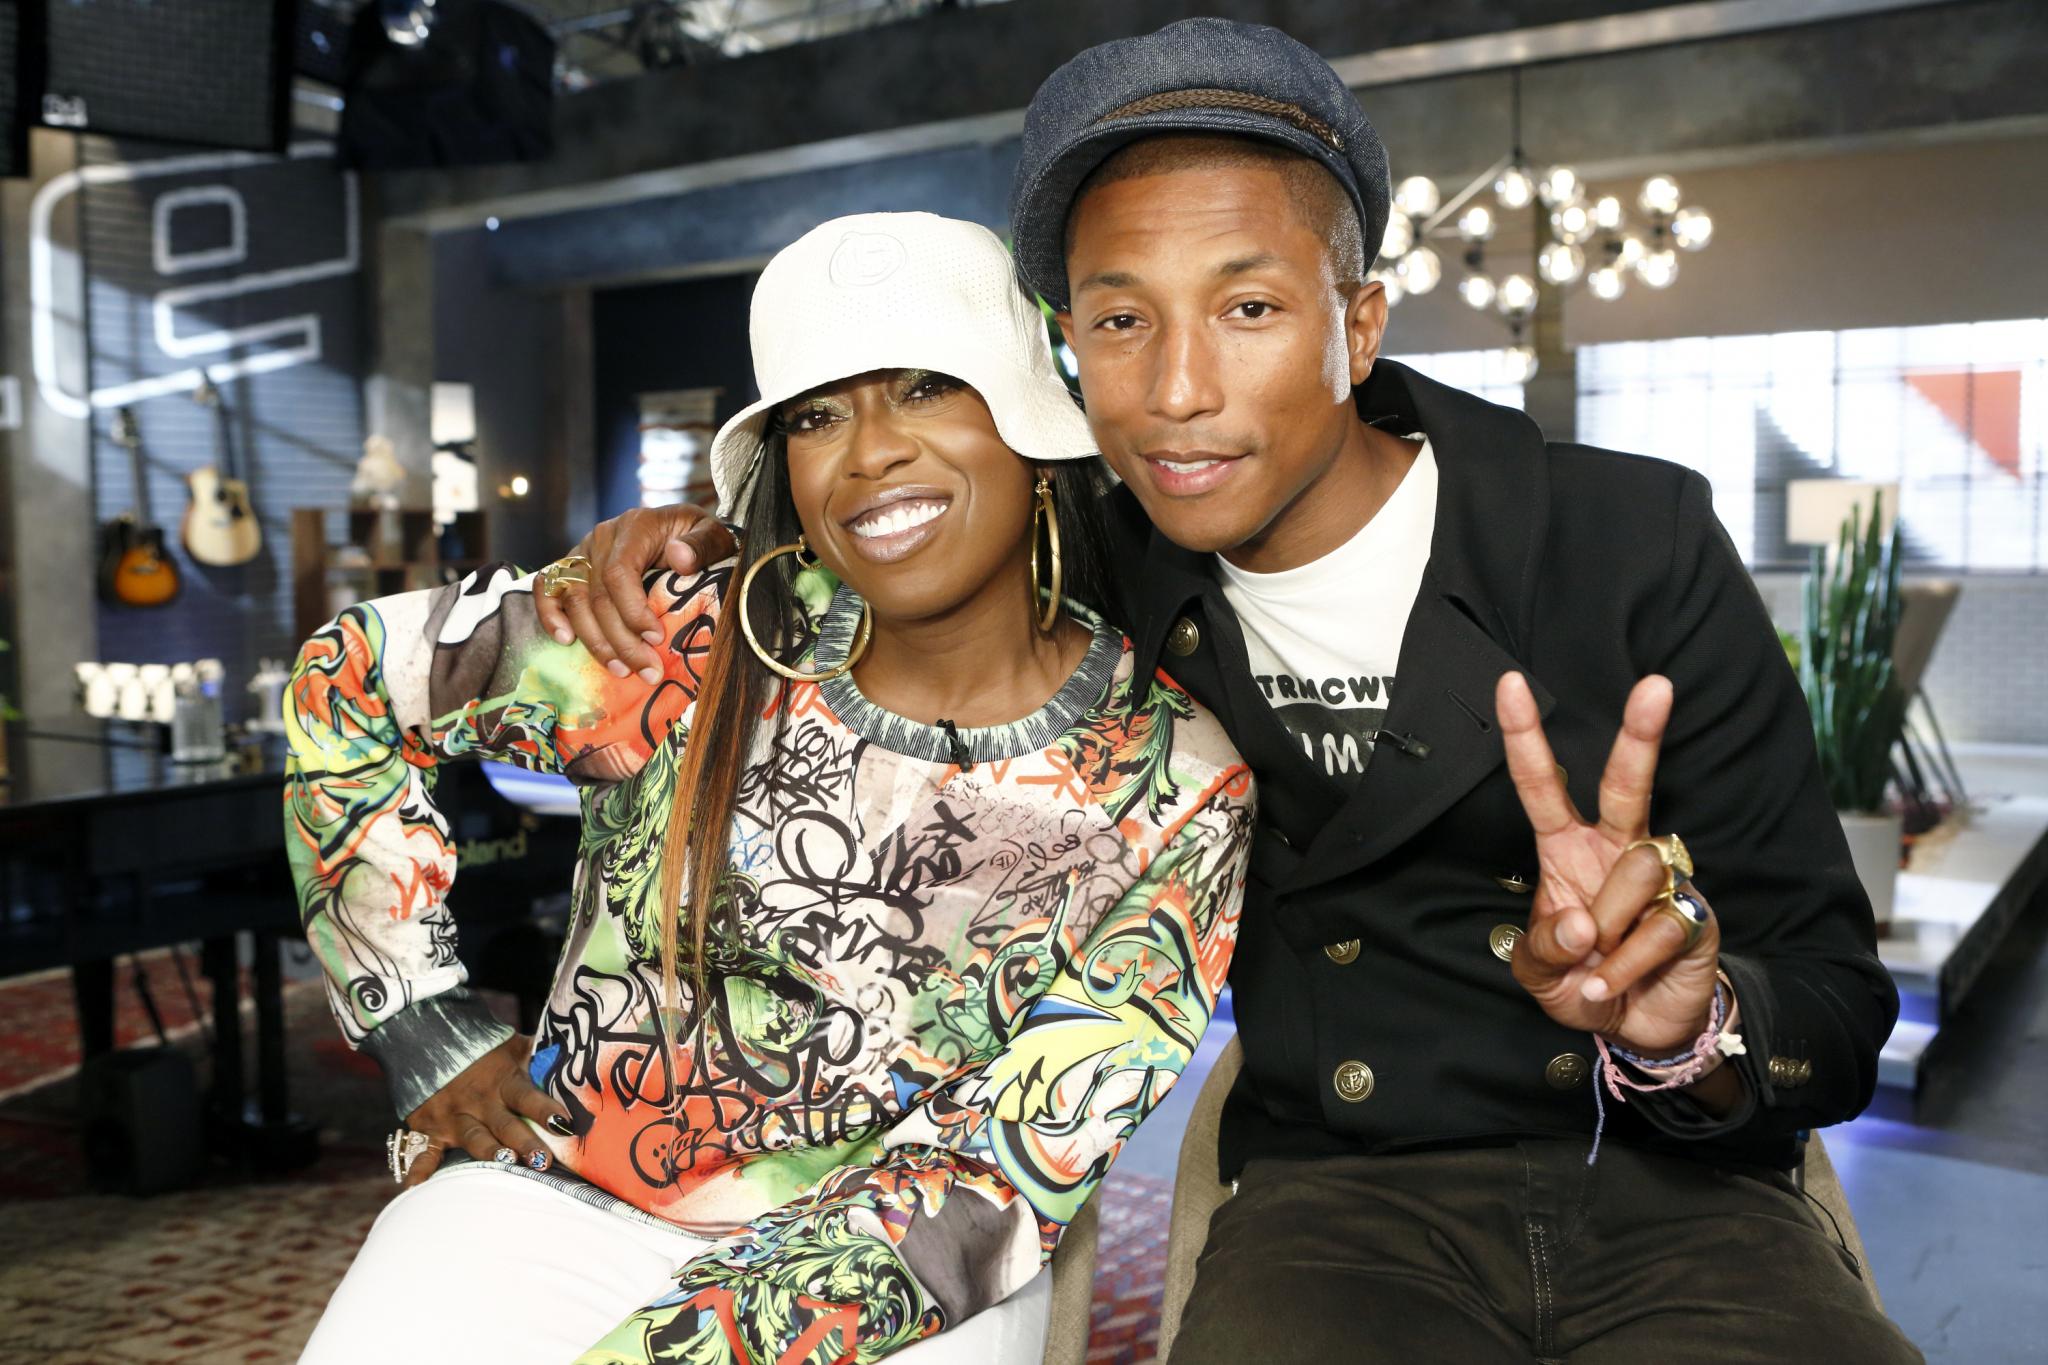 Check Out Snippet of New Missy Elliot Track, 'WTF (Where They From)'